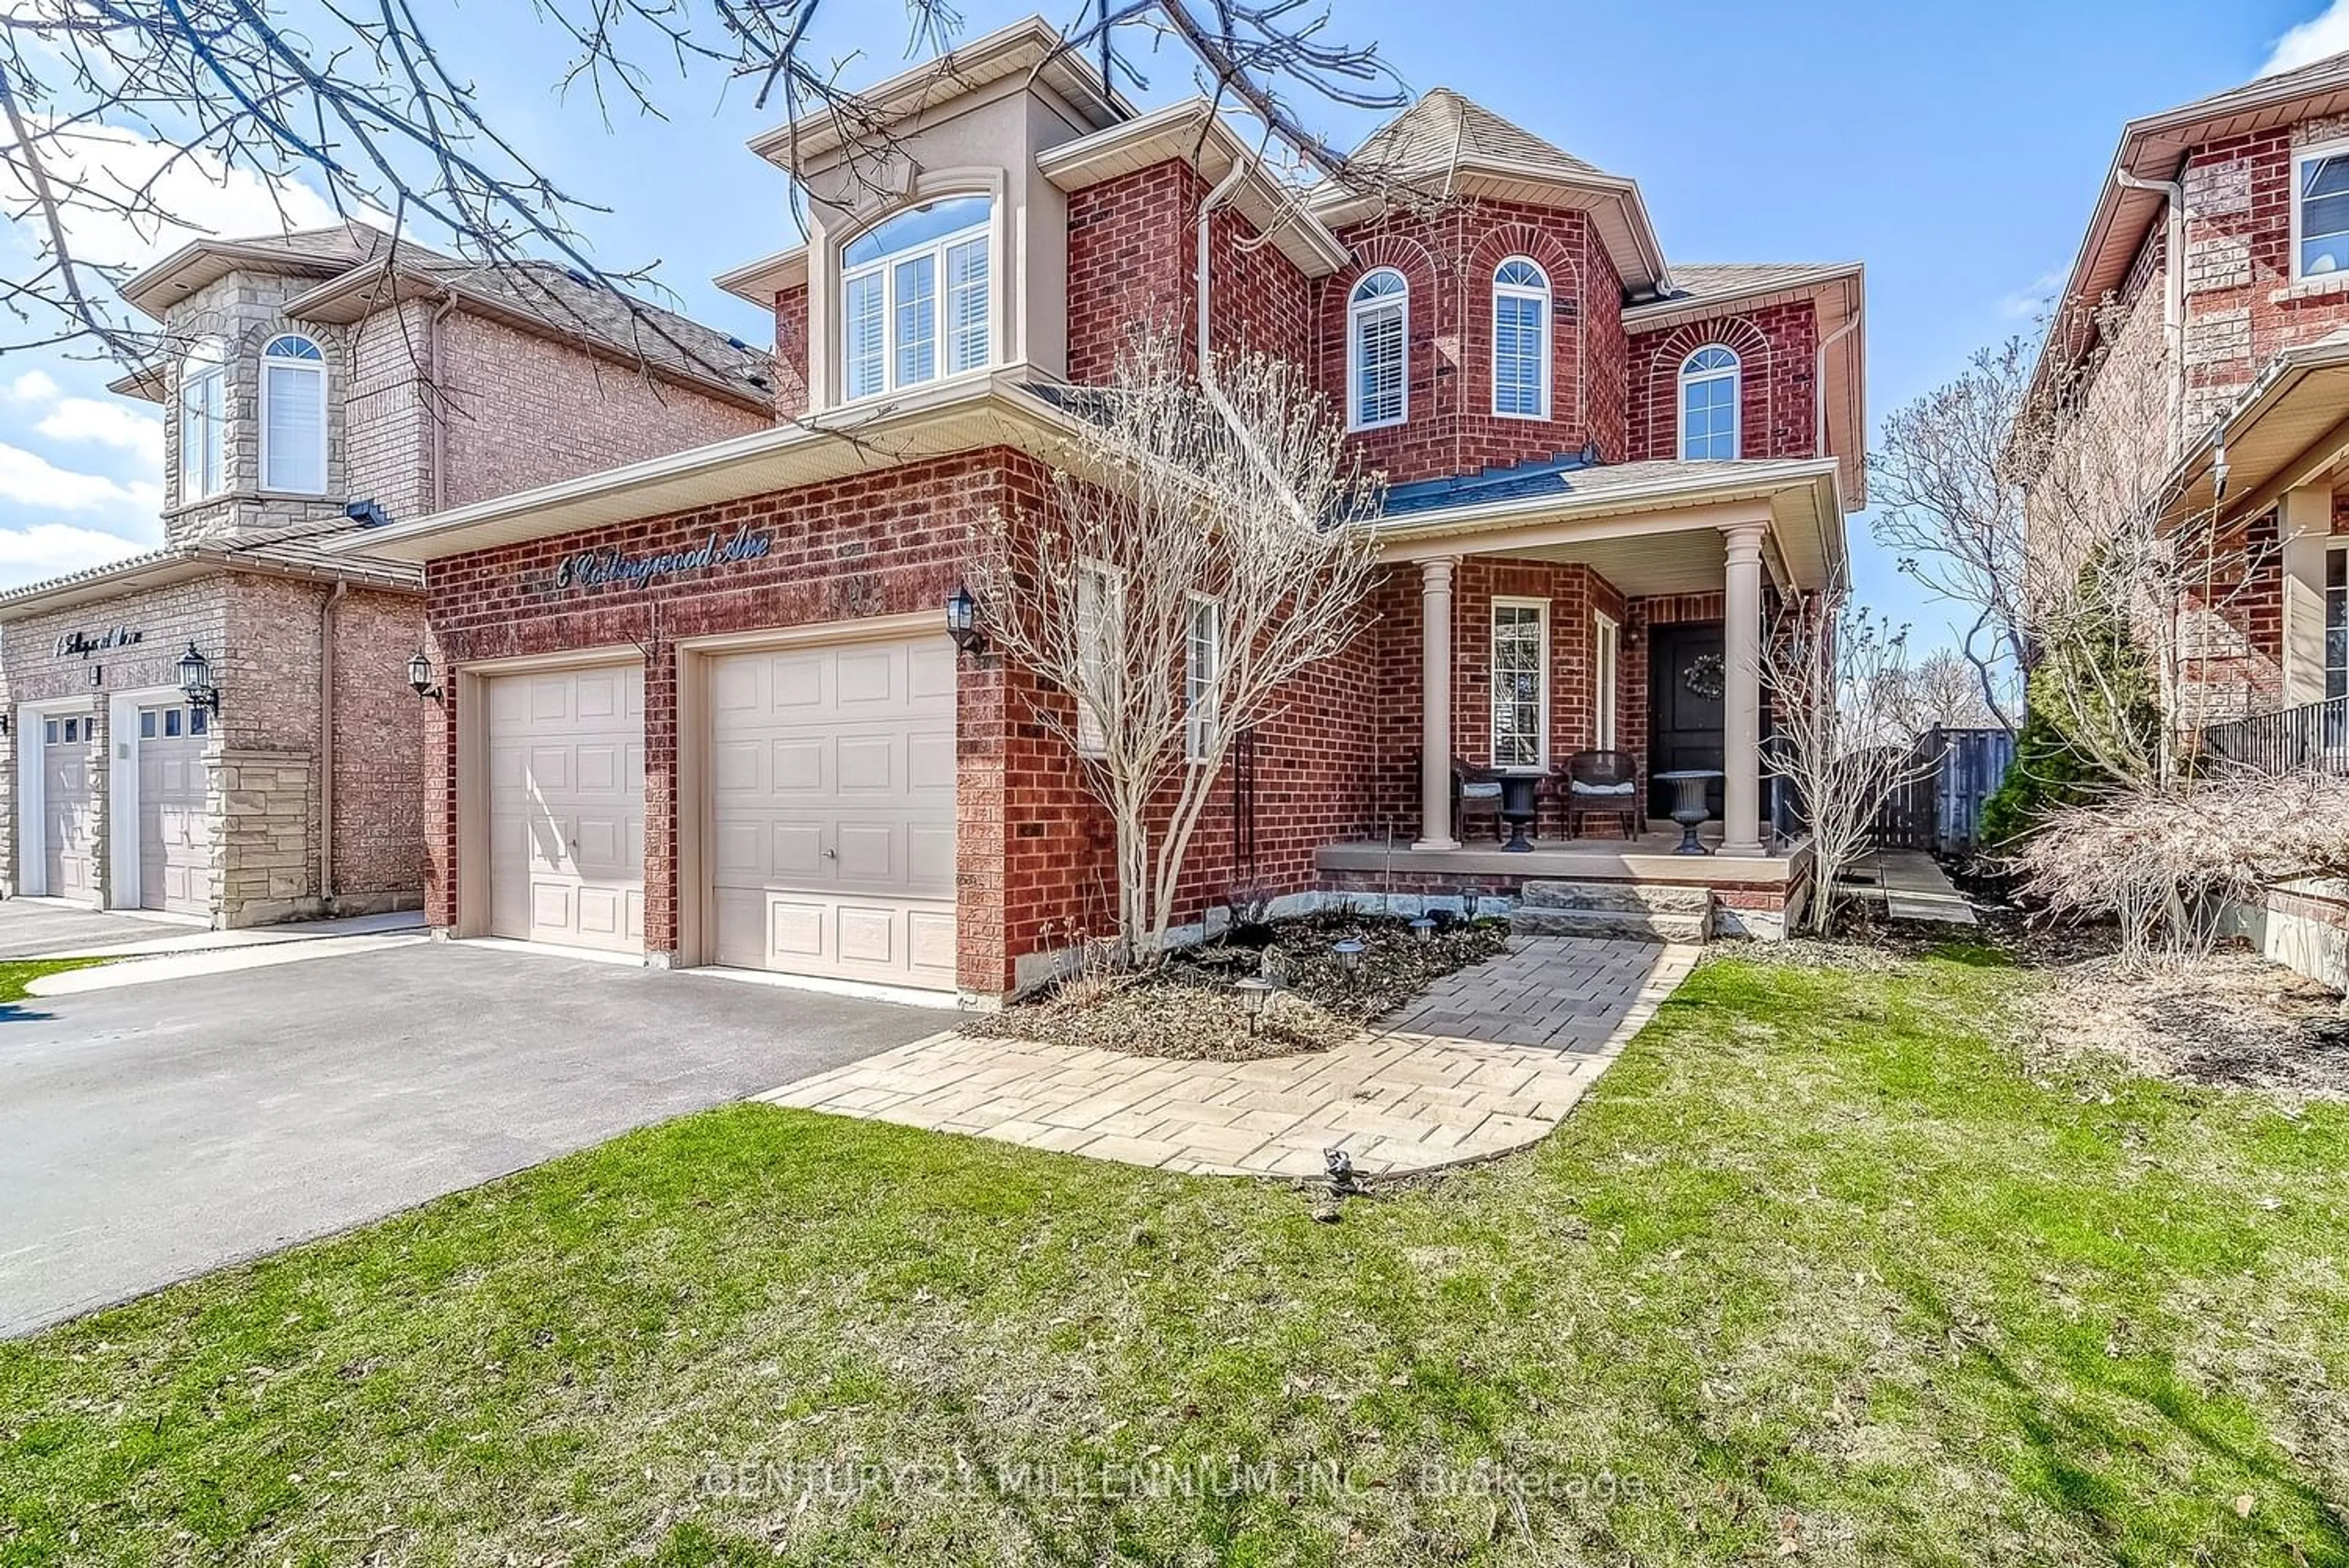 Home with brick exterior material for 6 Collingwood Ave, Brampton Ontario L7A 2E5